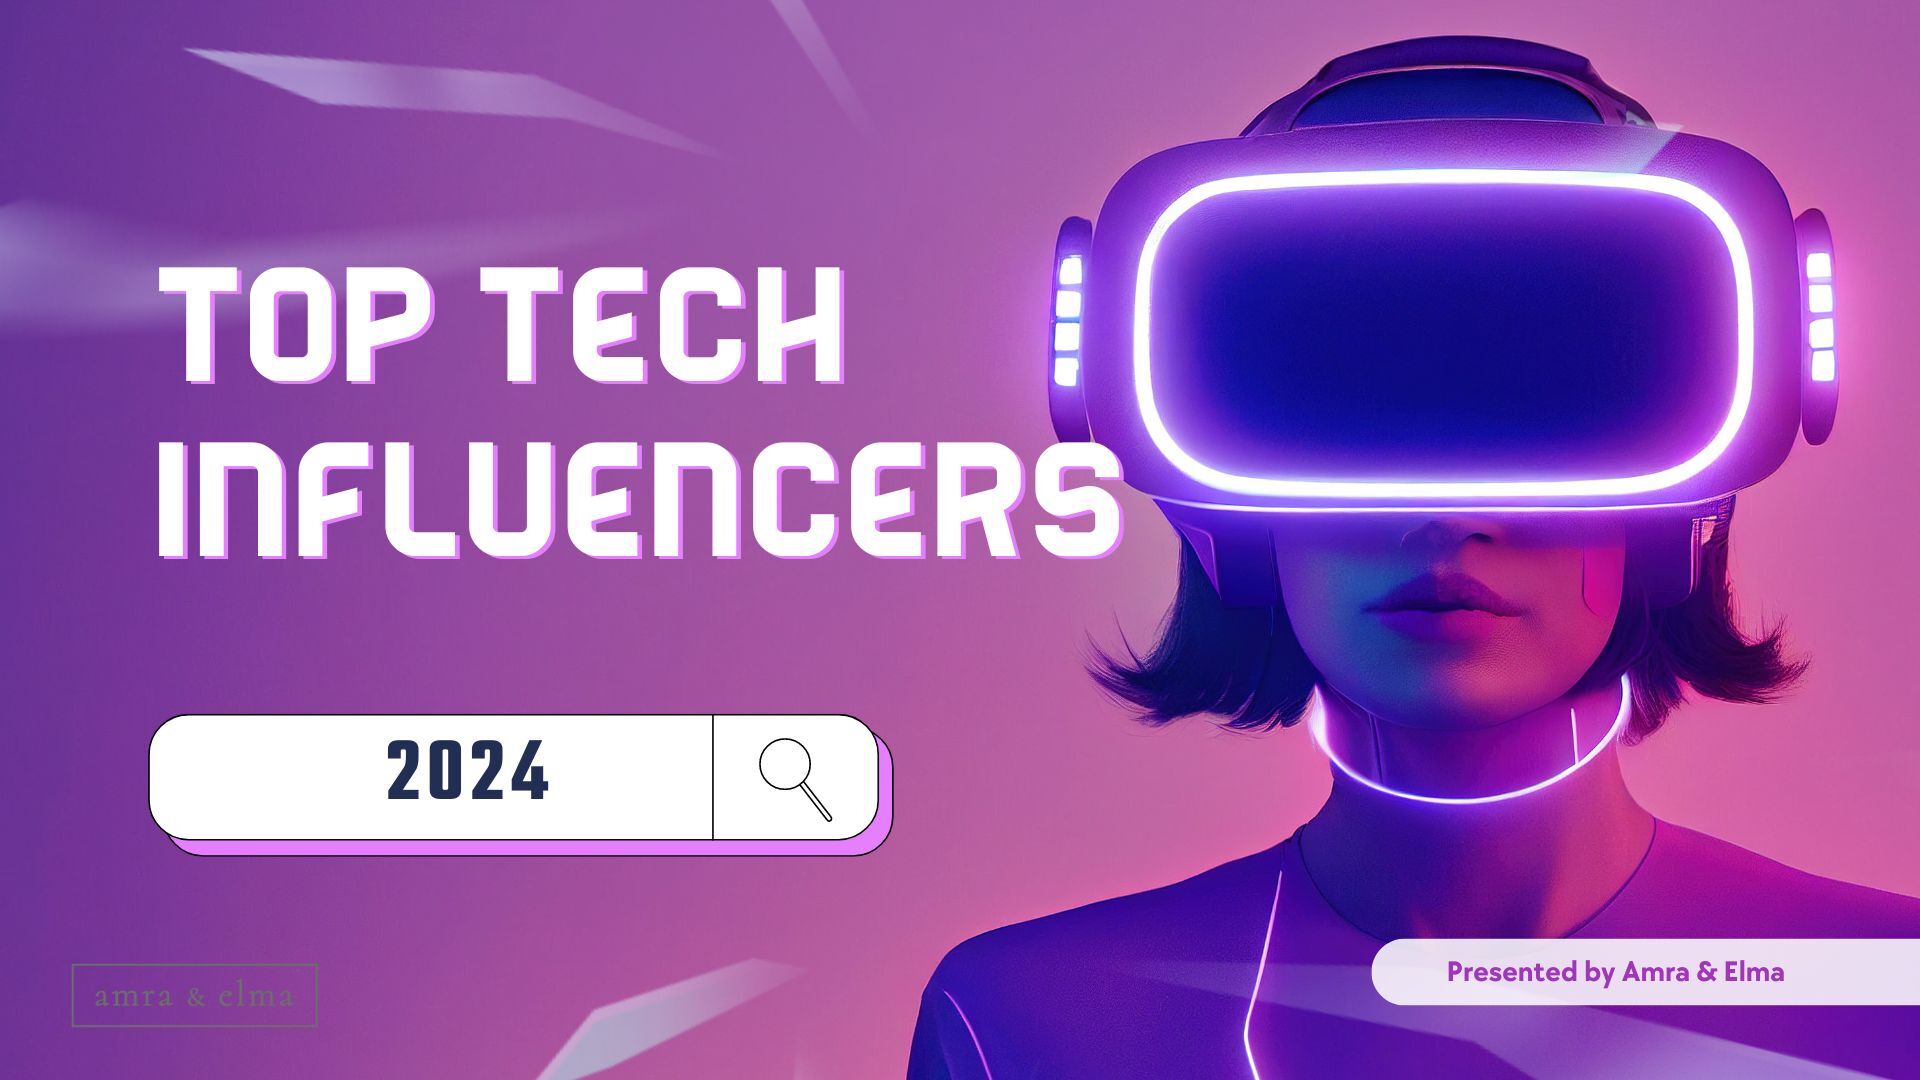 100 TOP TECH INFLUENCERS IN 2023